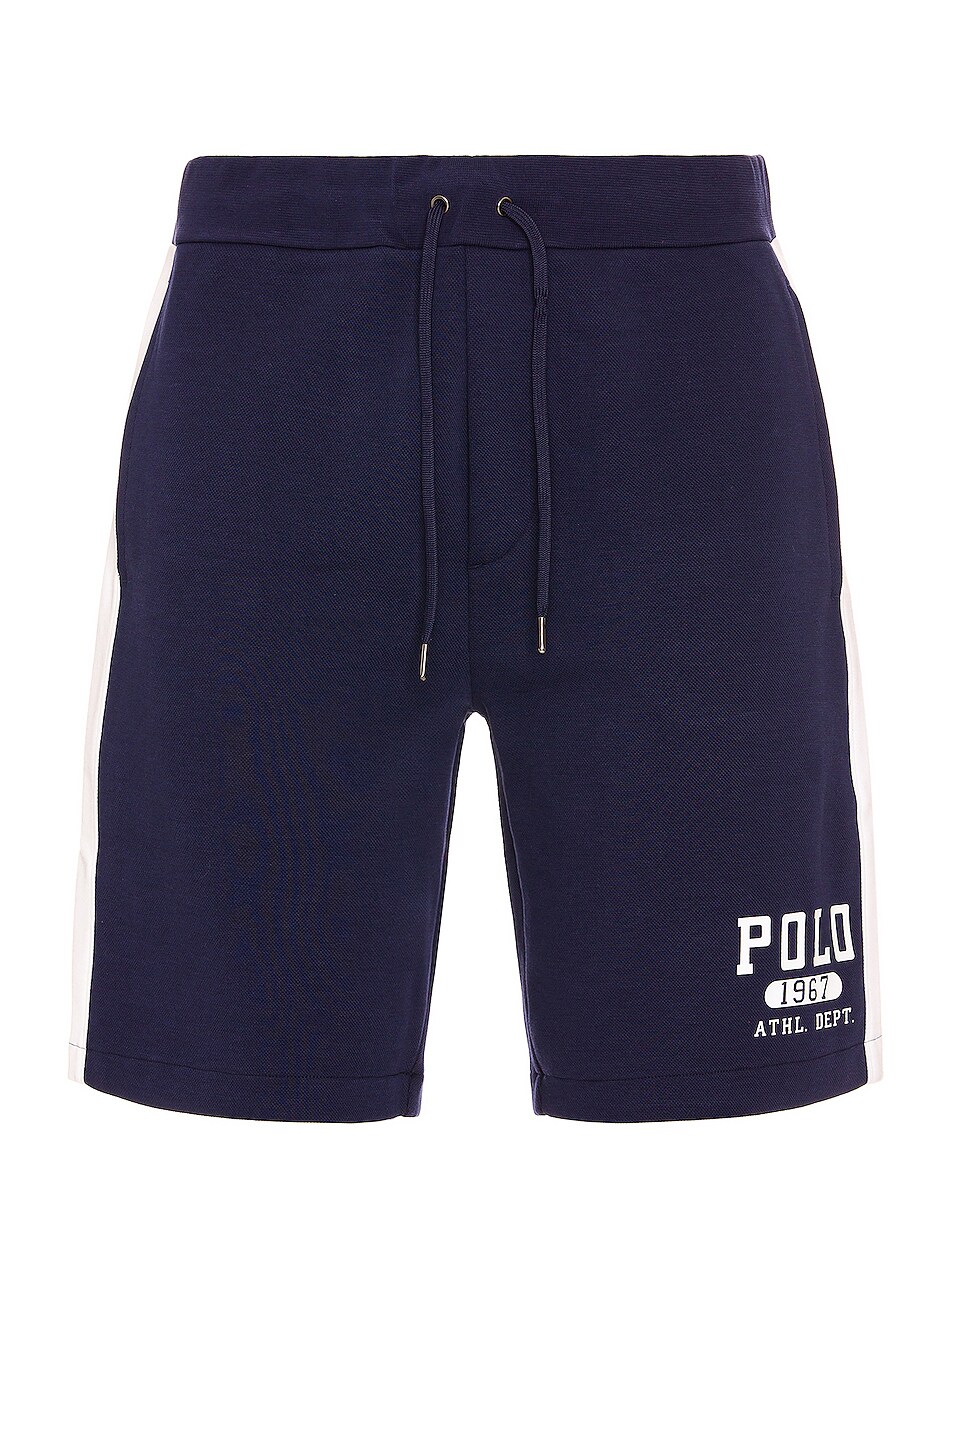 Image 1 of Polo Ralph Lauren Knit Shorts in Newport Navy